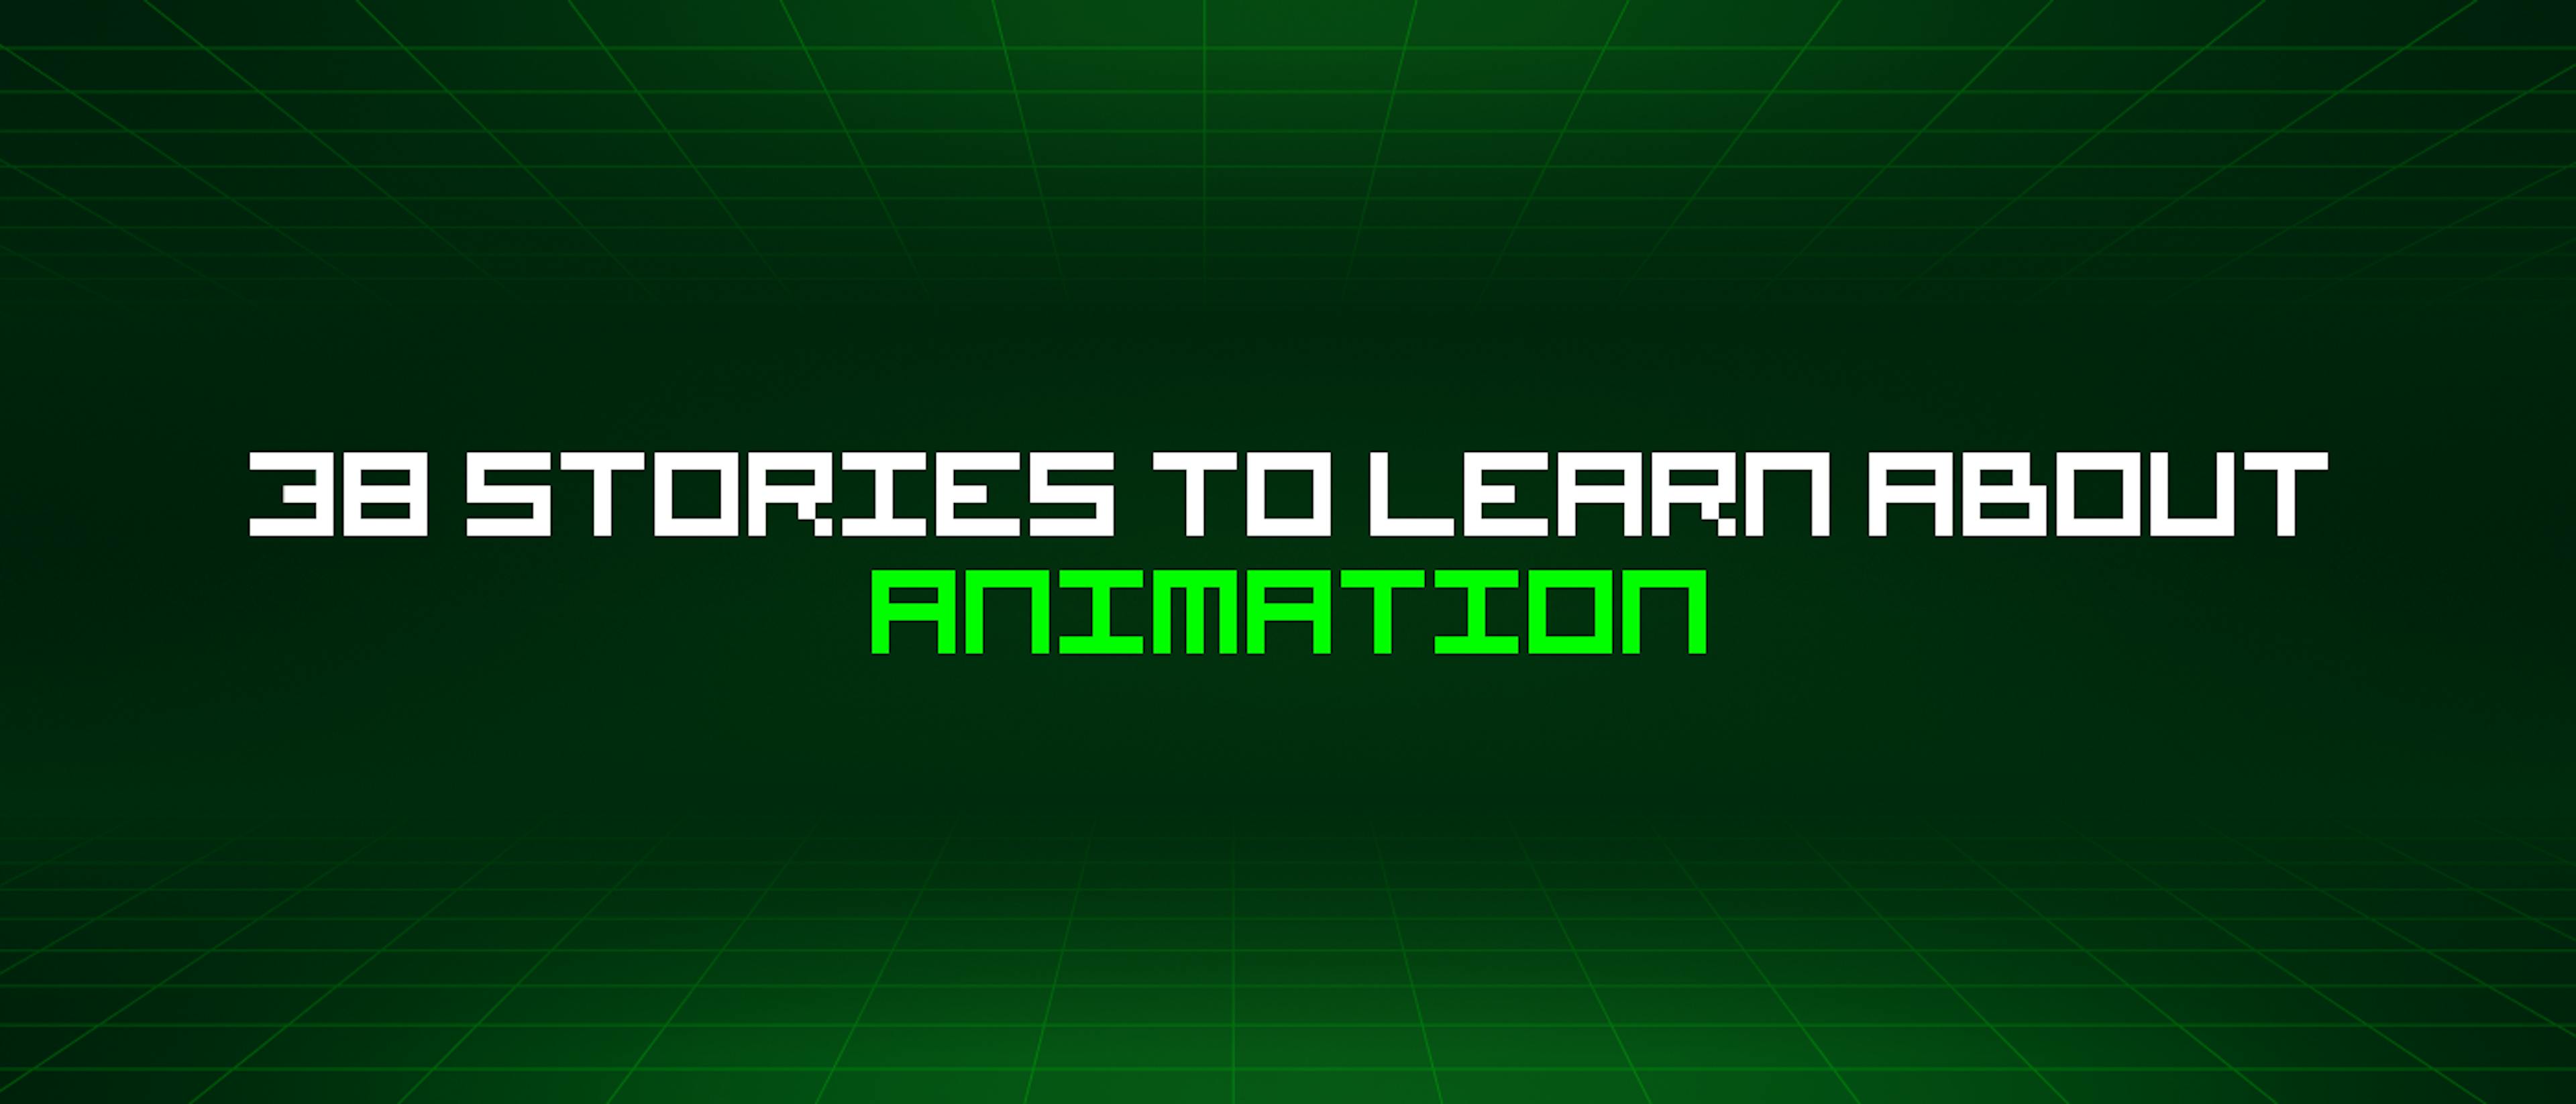 featured image - 38 Stories To Learn About Animation